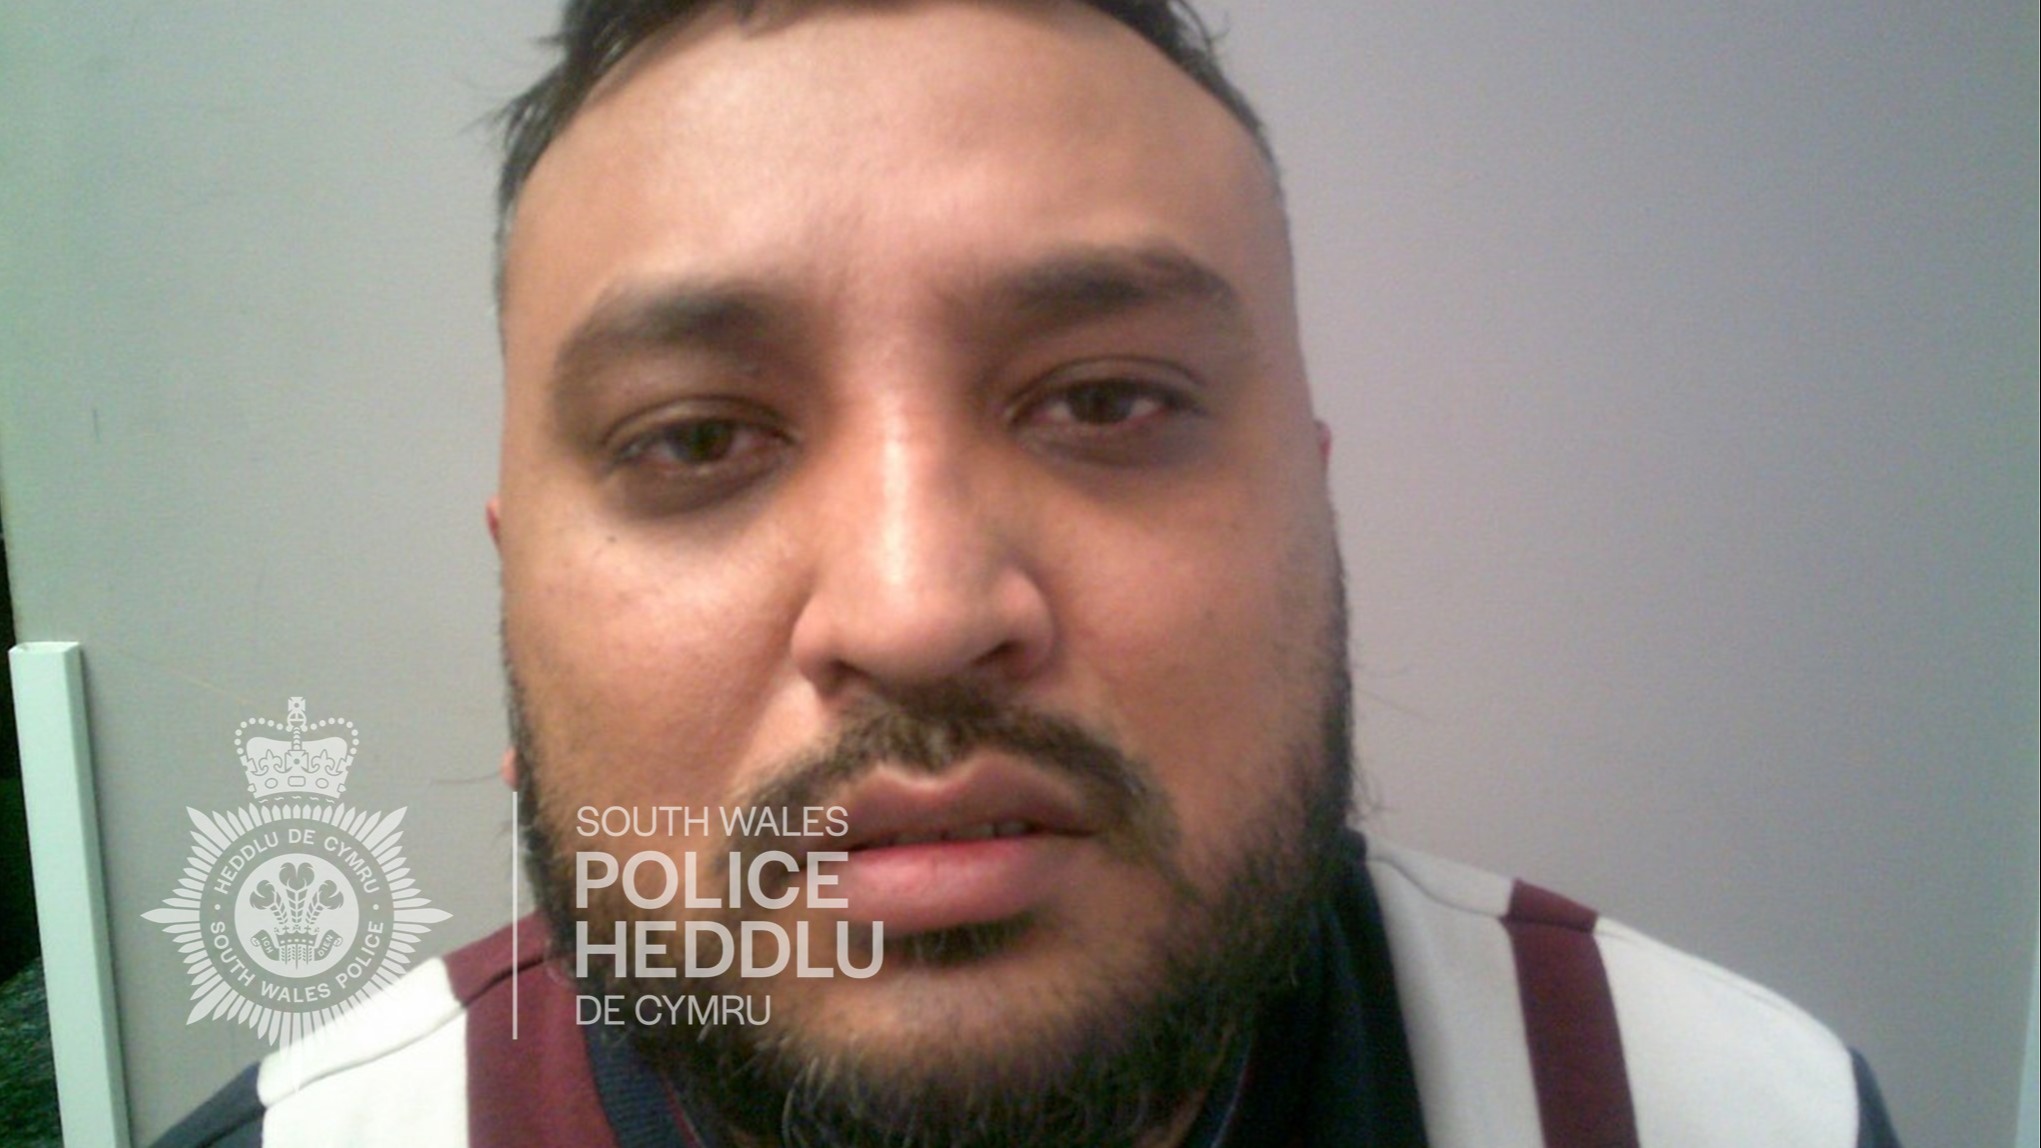 Cardiff taxi driver raped woman after forcing himself into her home by asking to use the toilet ITV News Wales